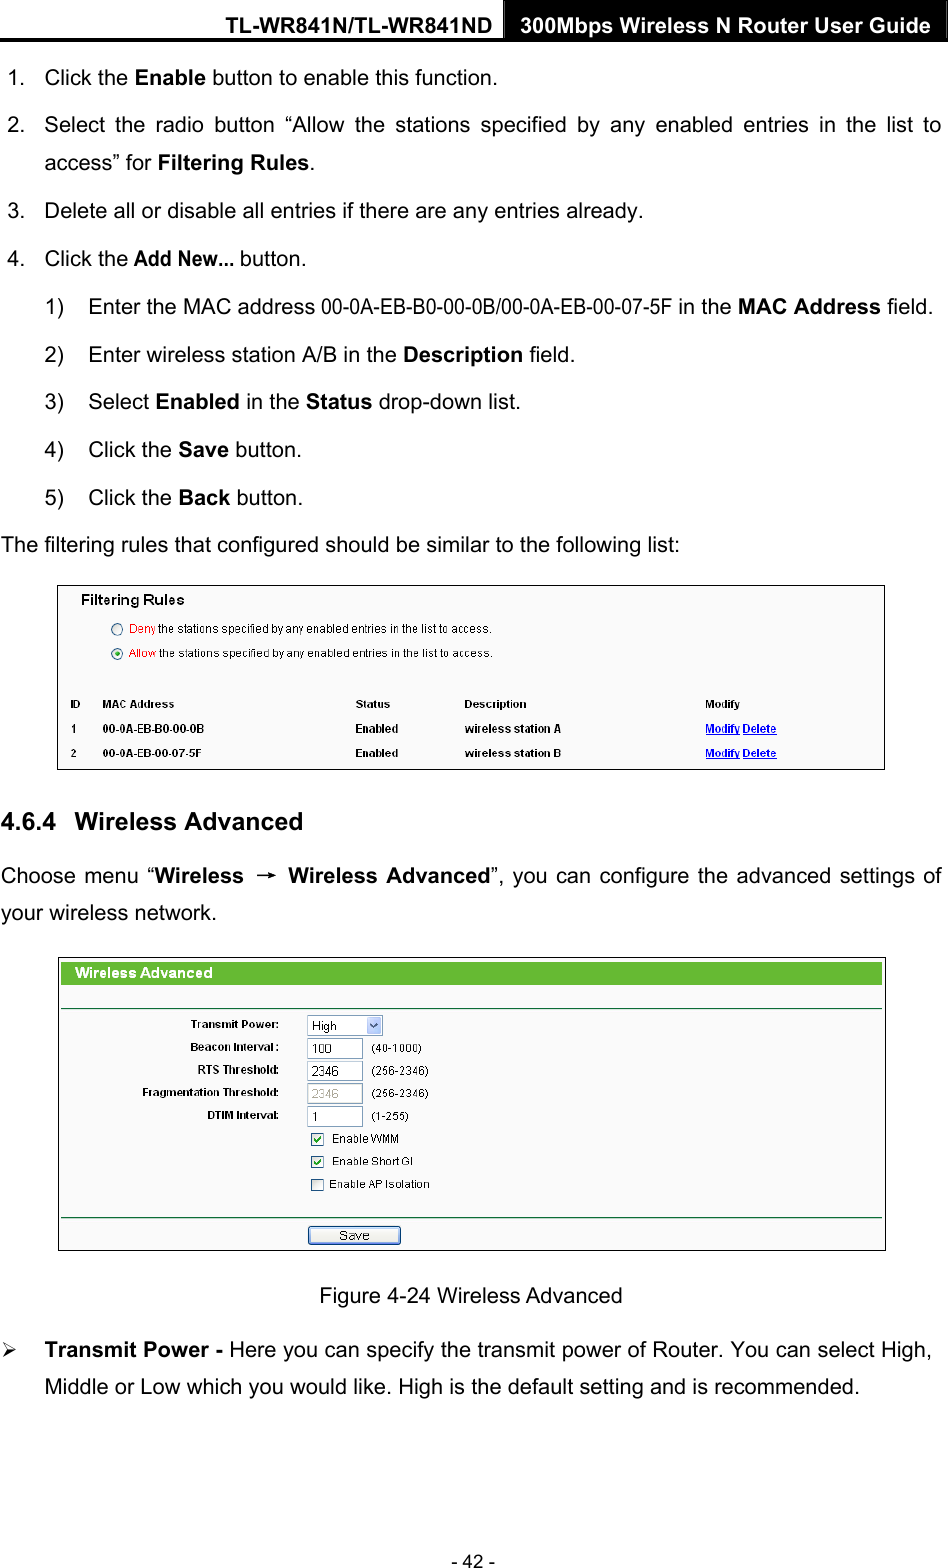 TL-WR841N/TL-WR841ND 300Mbps Wireless N Router User Guide - 42 - 1. Click the Enable button to enable this function. 2.  Select the radio button “Allow the stations specified by any enabled entries in the list to access” for Filtering Rules. 3.  Delete all or disable all entries if there are any entries already. 4. Click the Add New... button.  1)  Enter the MAC address 00-0A-EB-B0-00-0B/00-0A-EB-00-07-5F in the MAC Address field. 2)  Enter wireless station A/B in the Description field. 3) Select Enabled in the Status drop-down list. 4) Click the Save button. 5) Click the Back button. The filtering rules that configured should be similar to the following list:  4.6.4  Wireless Advanced Choose menu “Wireless  → Wireless Advanced”, you can configure the advanced settings of your wireless network.  Figure 4-24 Wireless Advanced ¾ Transmit Power - Here you can specify the transmit power of Router. You can select High, Middle or Low which you would like. High is the default setting and is recommended. 